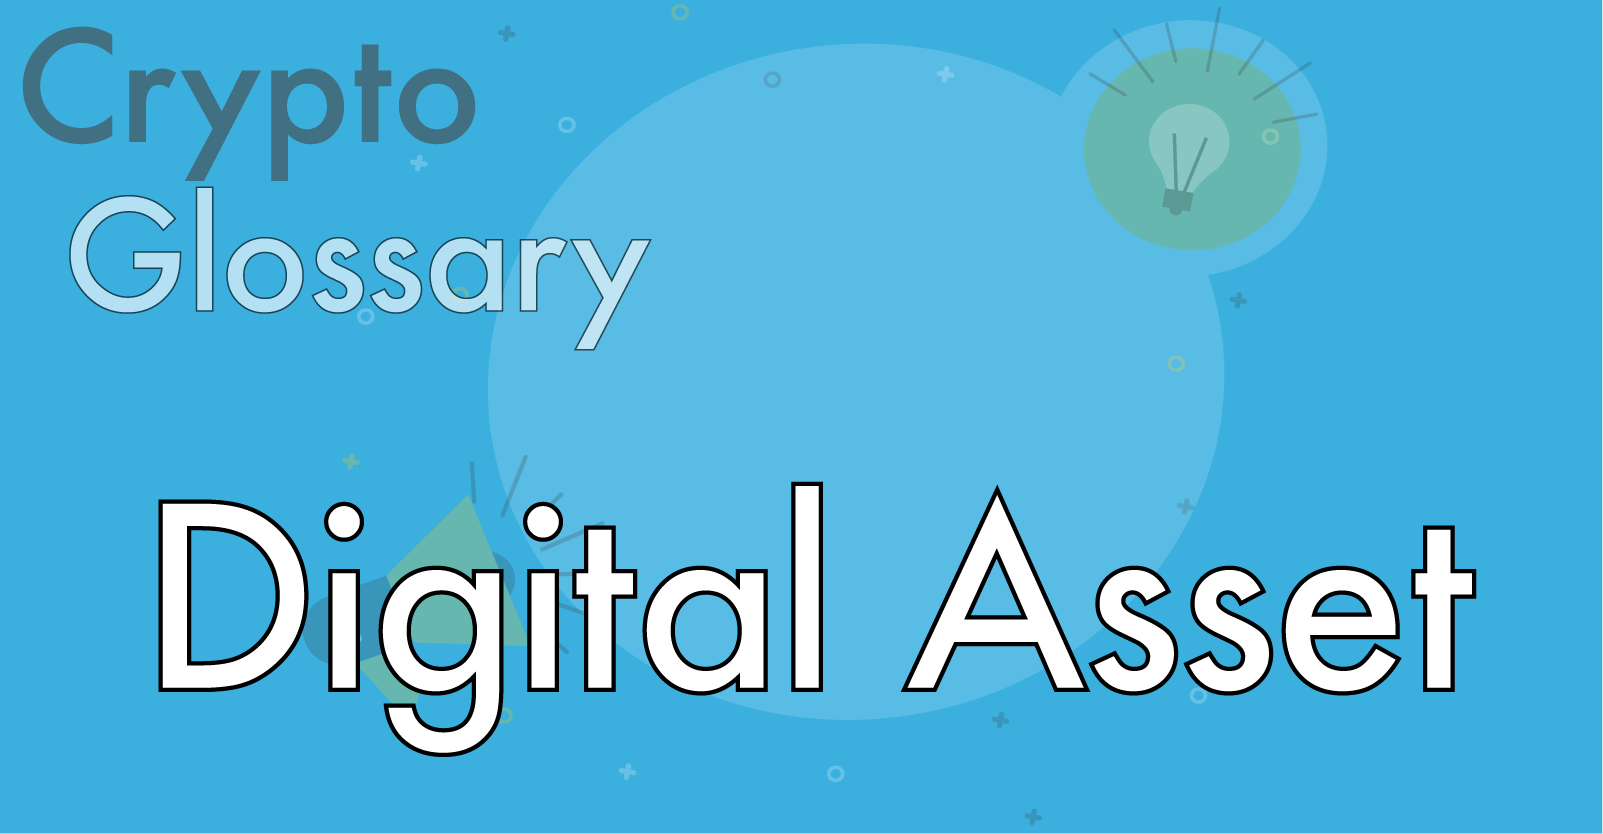 What is a Digital Asset and is it different from cryptos?